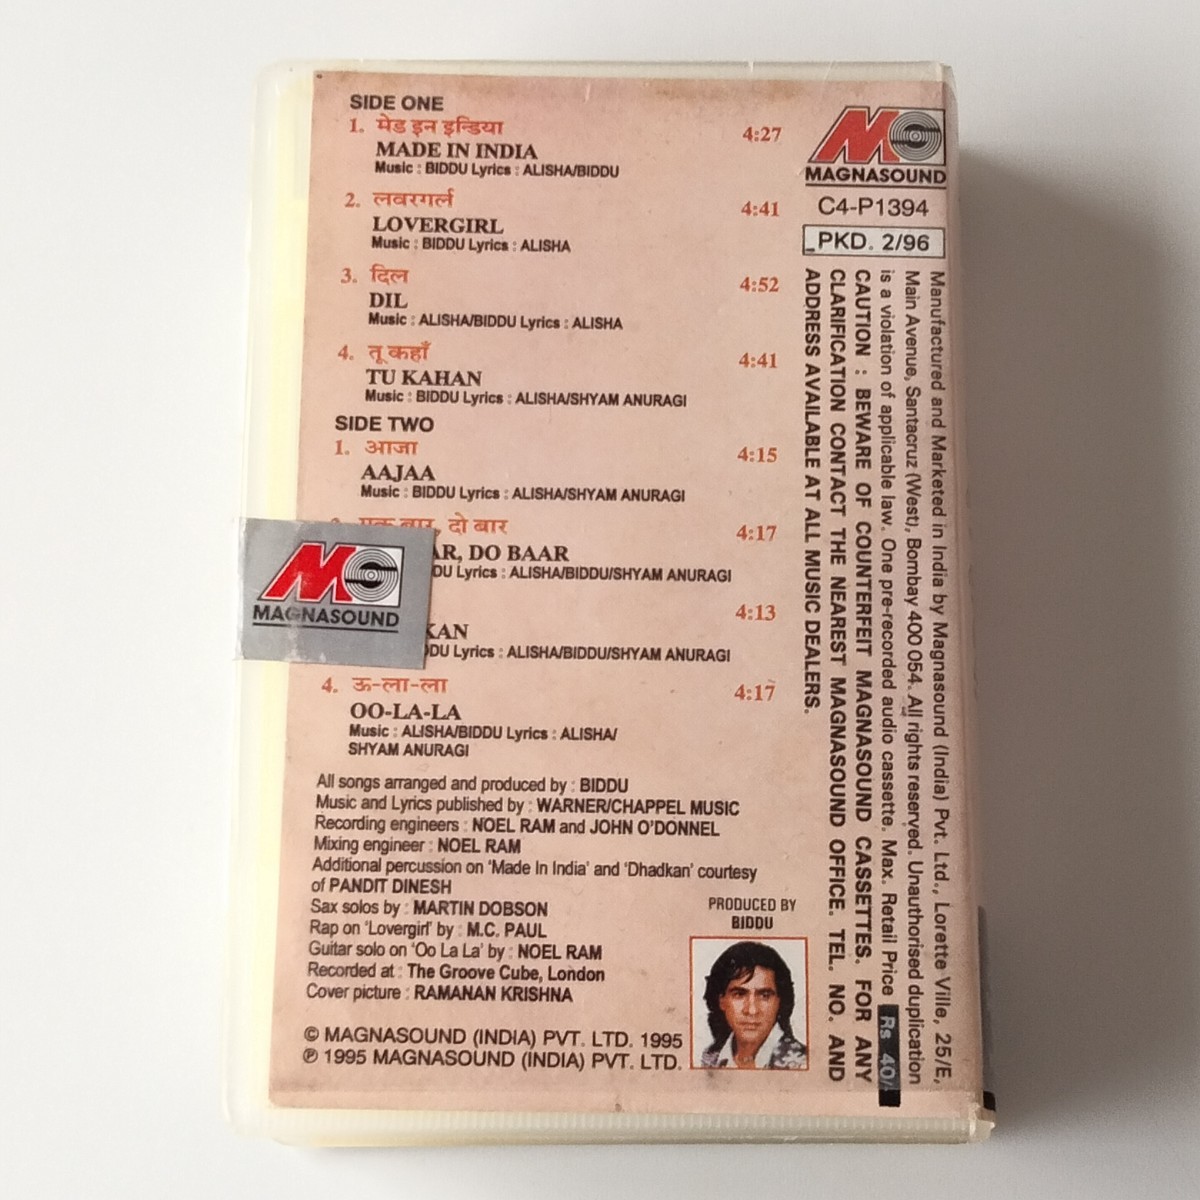 [ foreign record cassette tape ]ALISHA/MADE IN INDIA(C4-P1394)a Lee car /meido* in * Indy a/ India pops /MAGNASOUND/AAJAA/OO-LA-LA